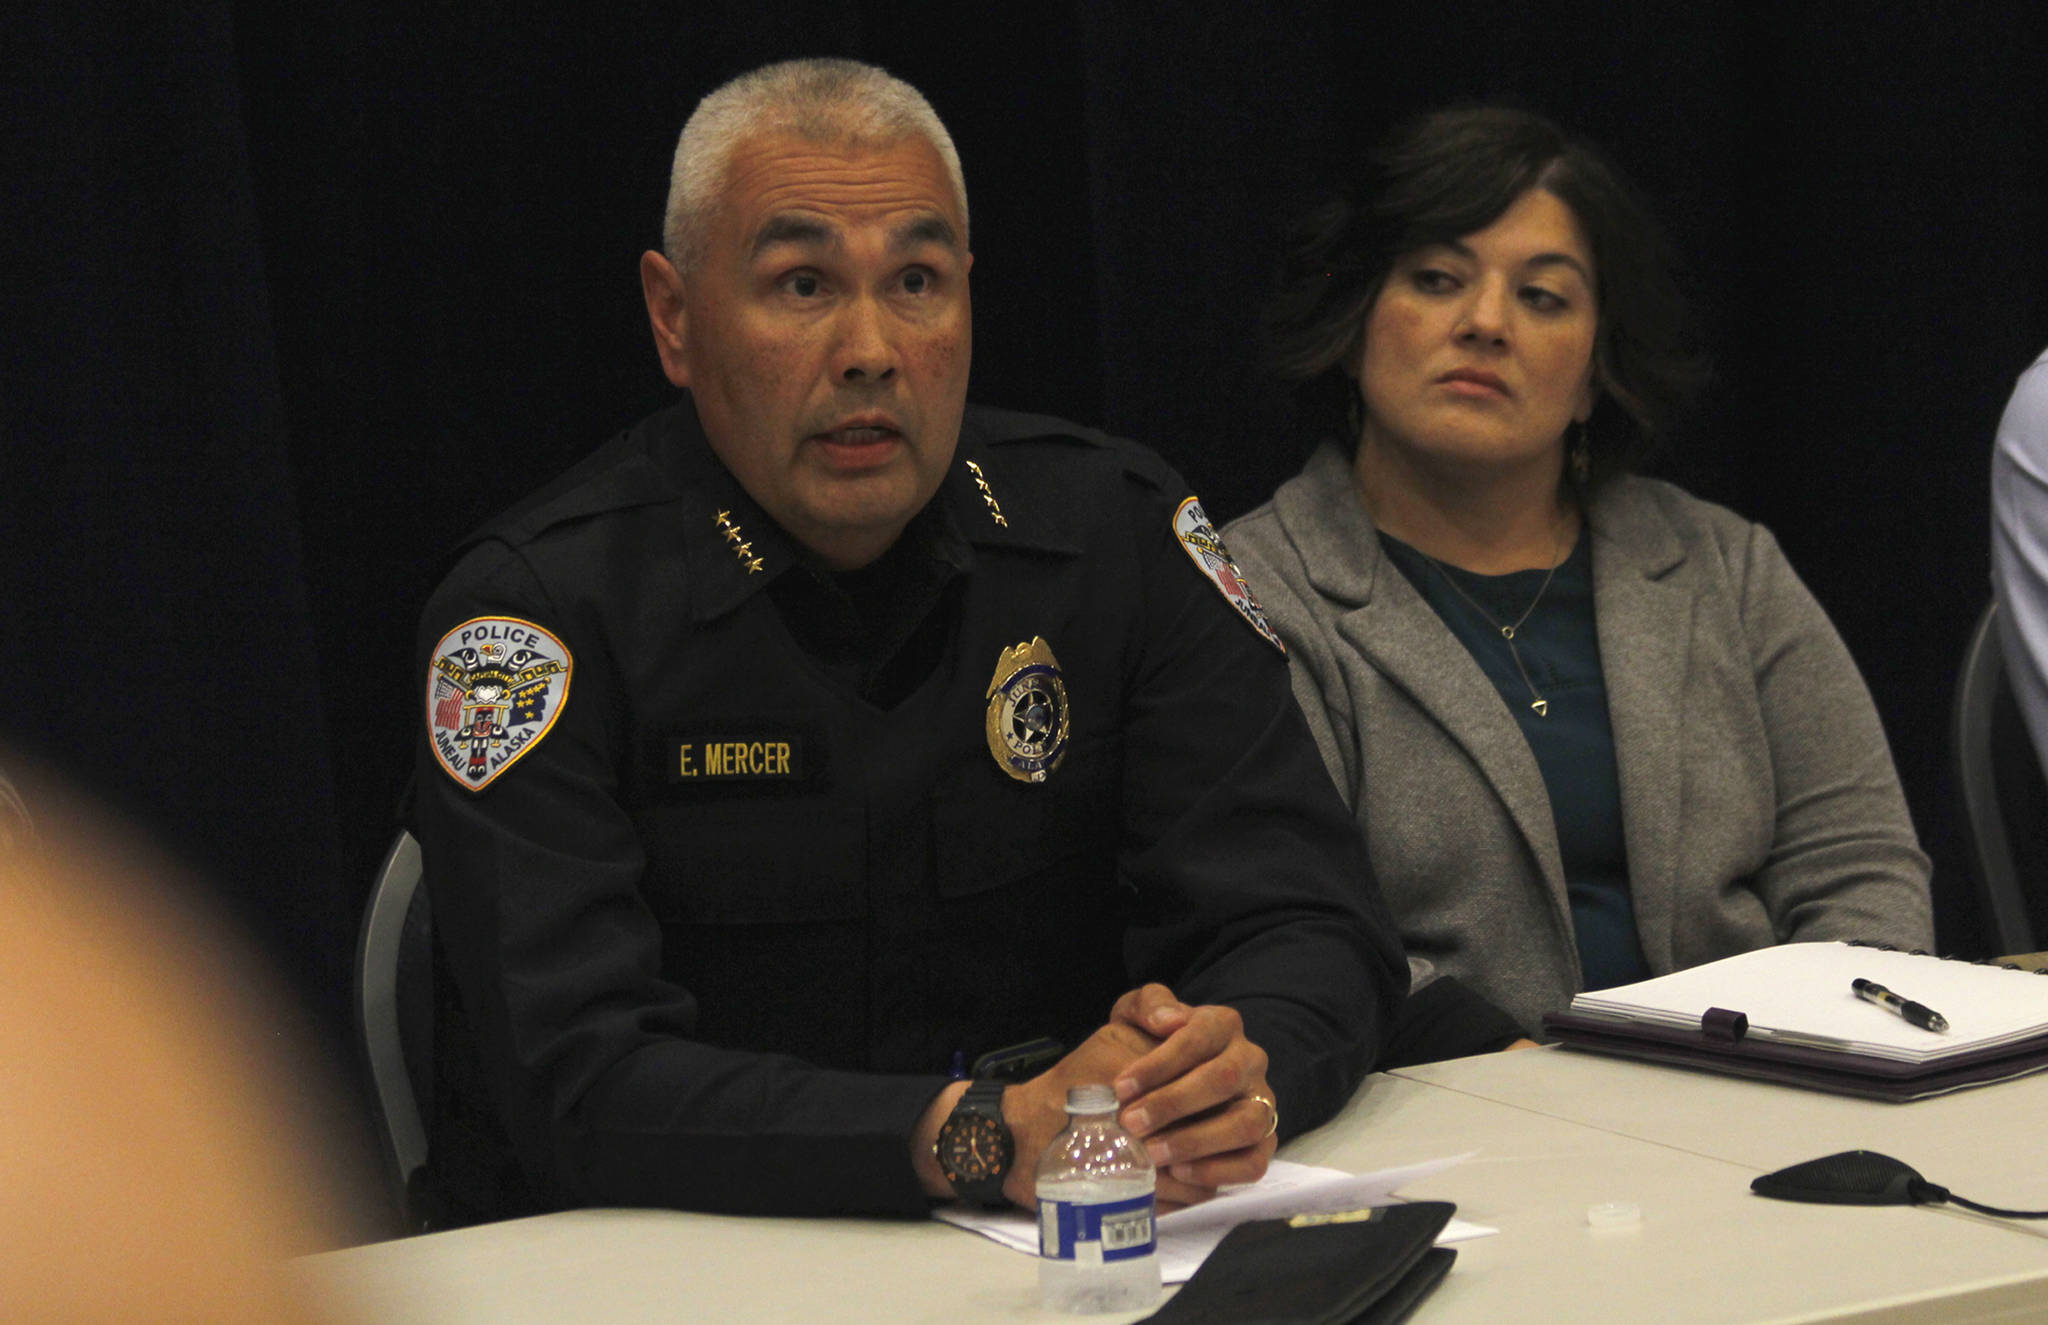 Juneau Police Department Chief Ed Mercer speaks at a special meeting of the Uptown Neighborhood Association on Tuesday, July 10, 2018. (Alex McCarthy | Juneau Empire File)